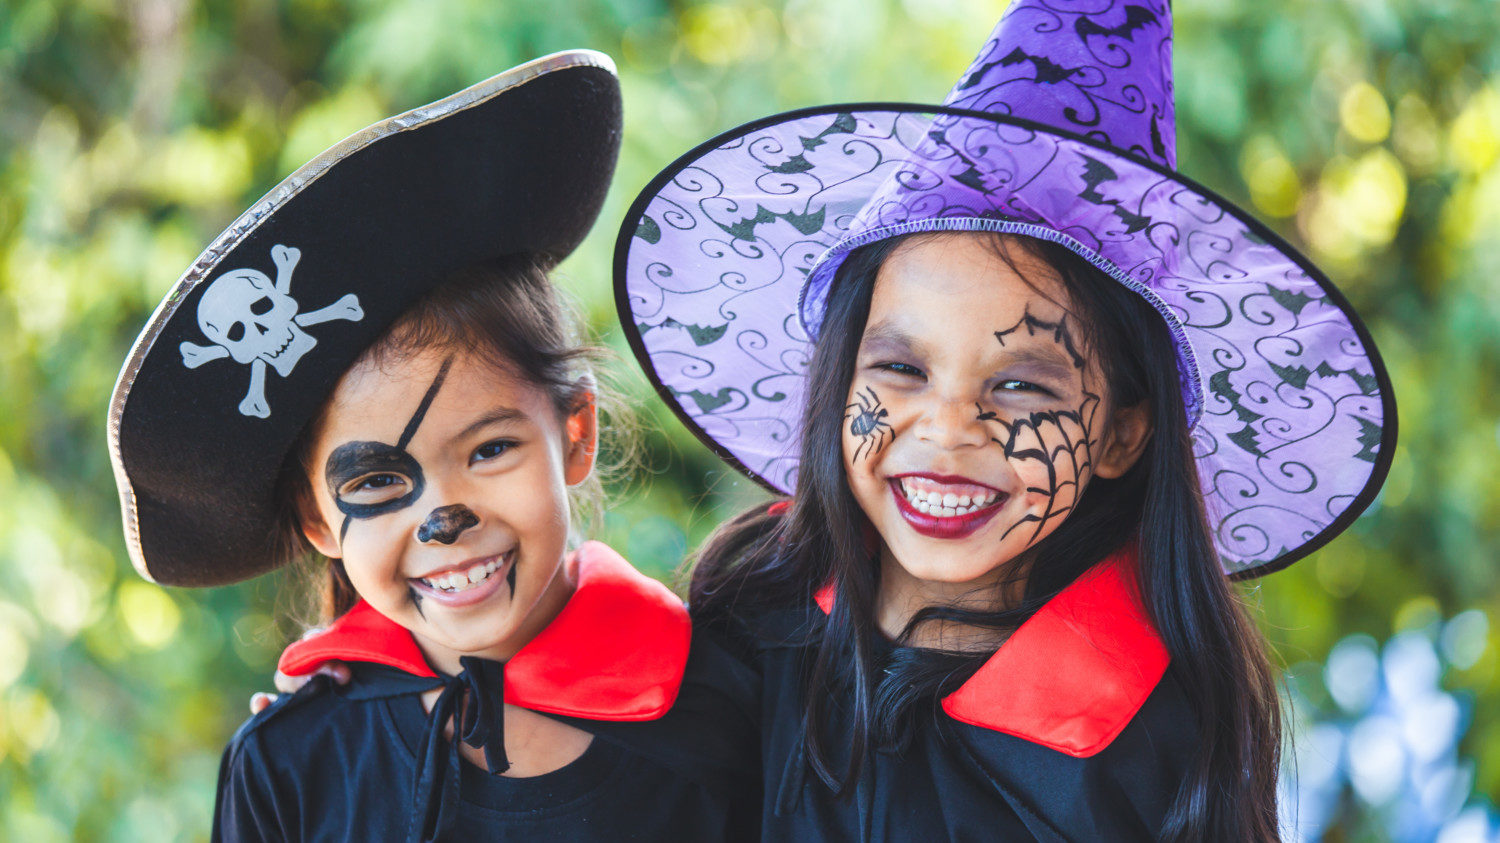 Kids dressed in costume for Halloween